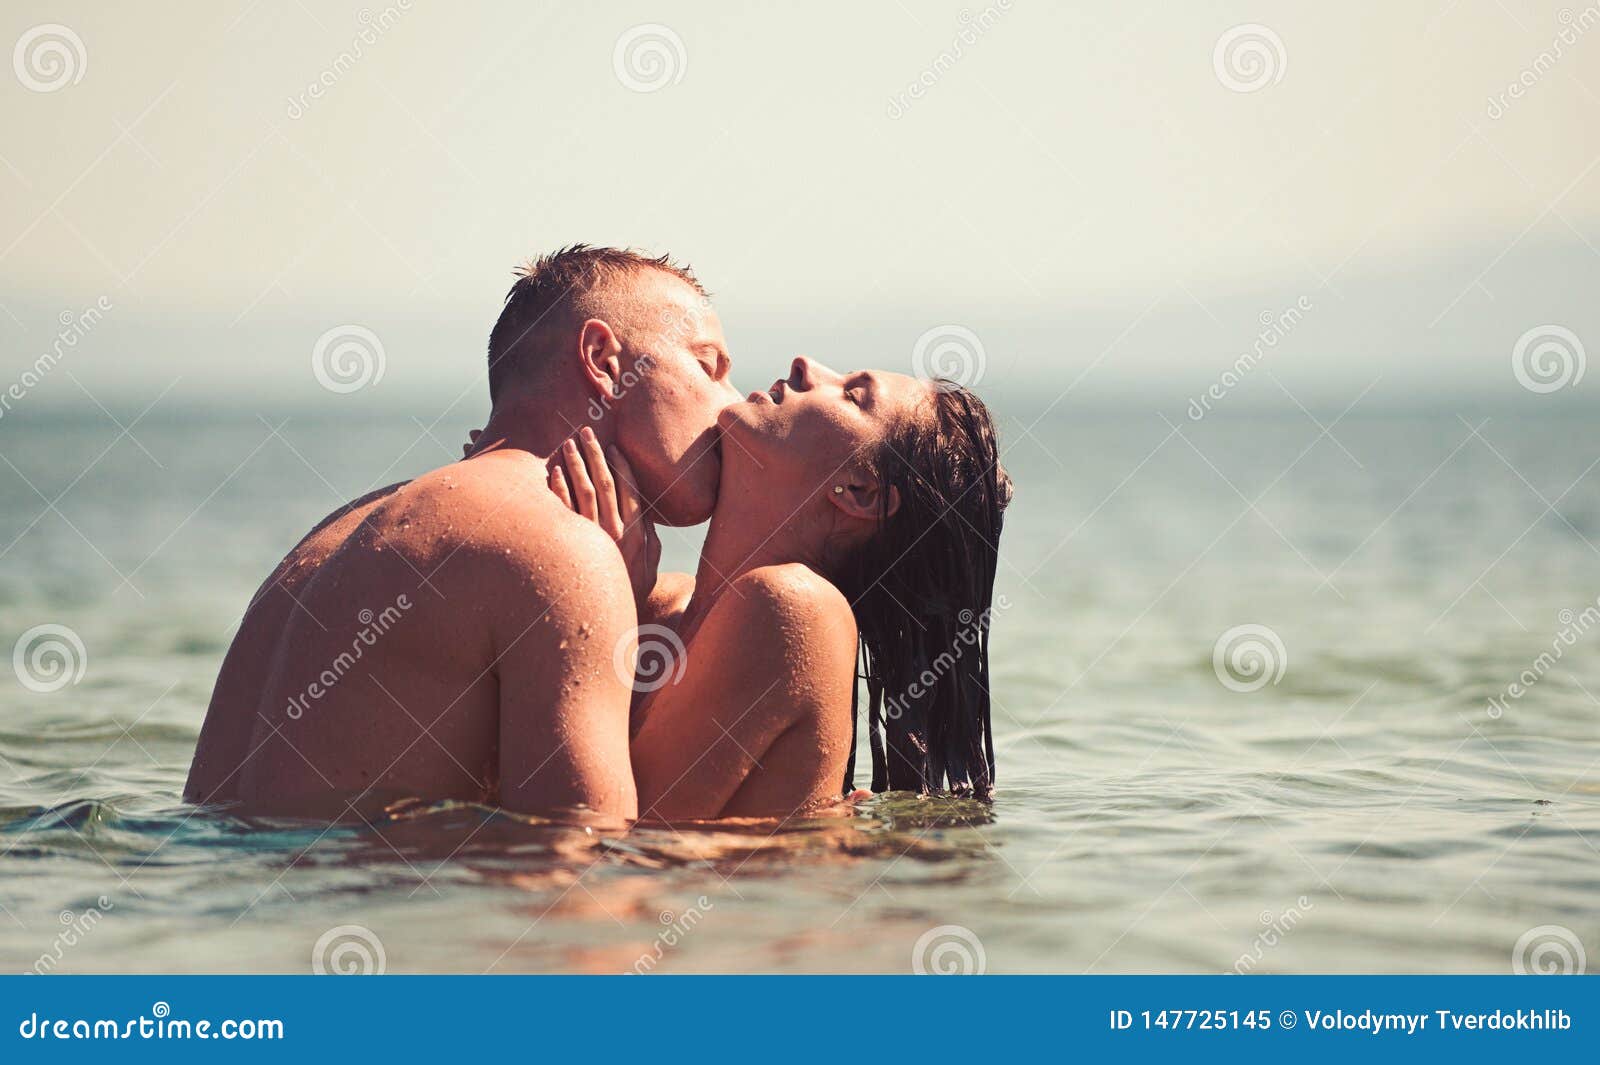 Happy Couple on the Beach Kissing in Water pic pic